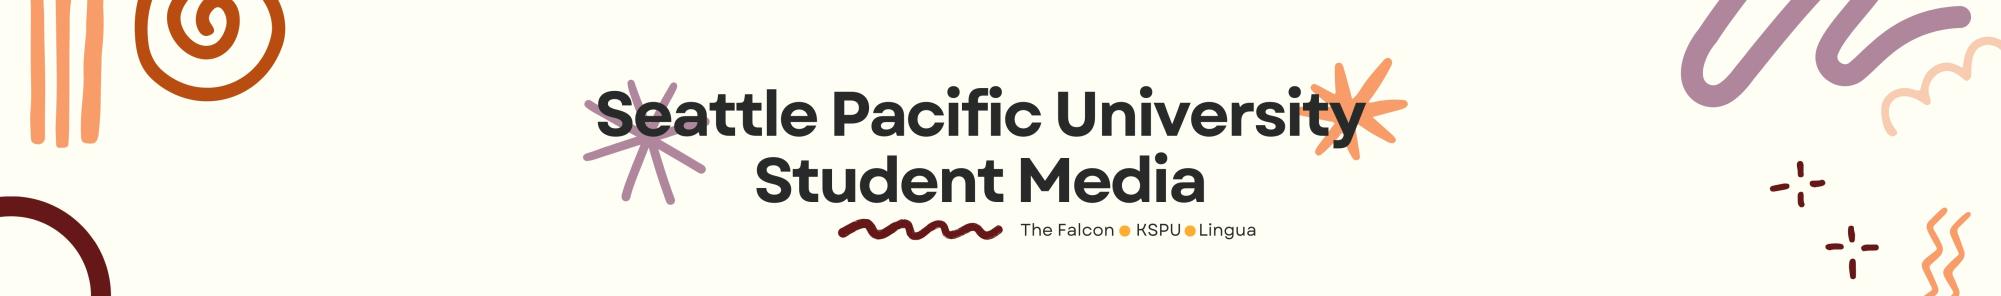 The Student Student Media Site of Seattle Pacific University